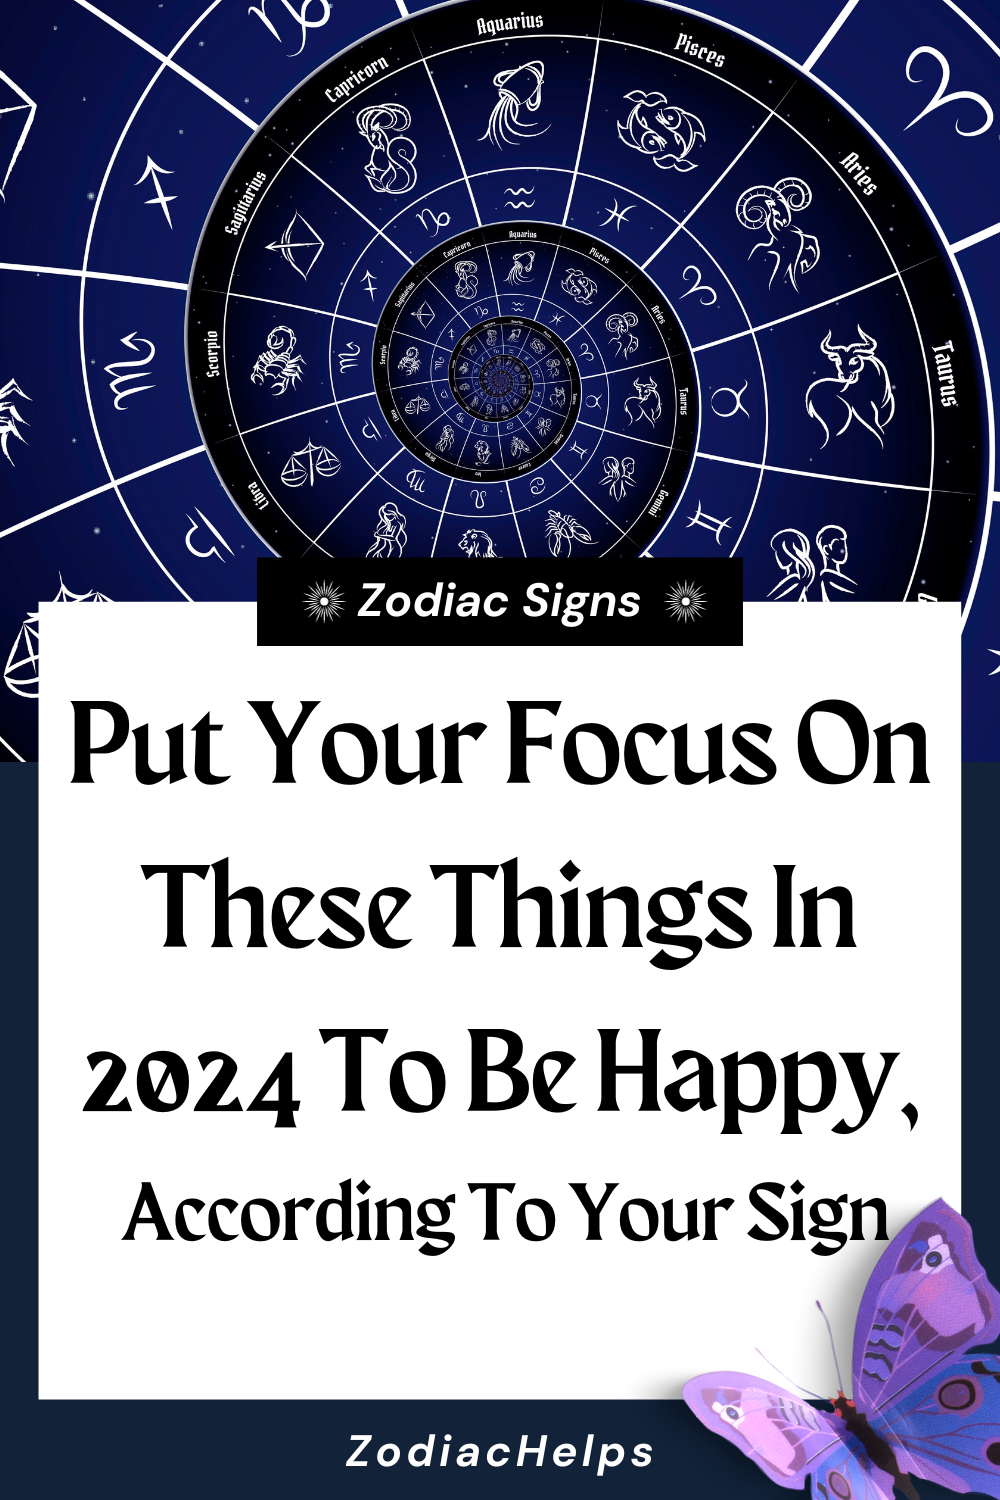 Put Your Focus On These Things In 2024 To Be Happy, According To Your Sign